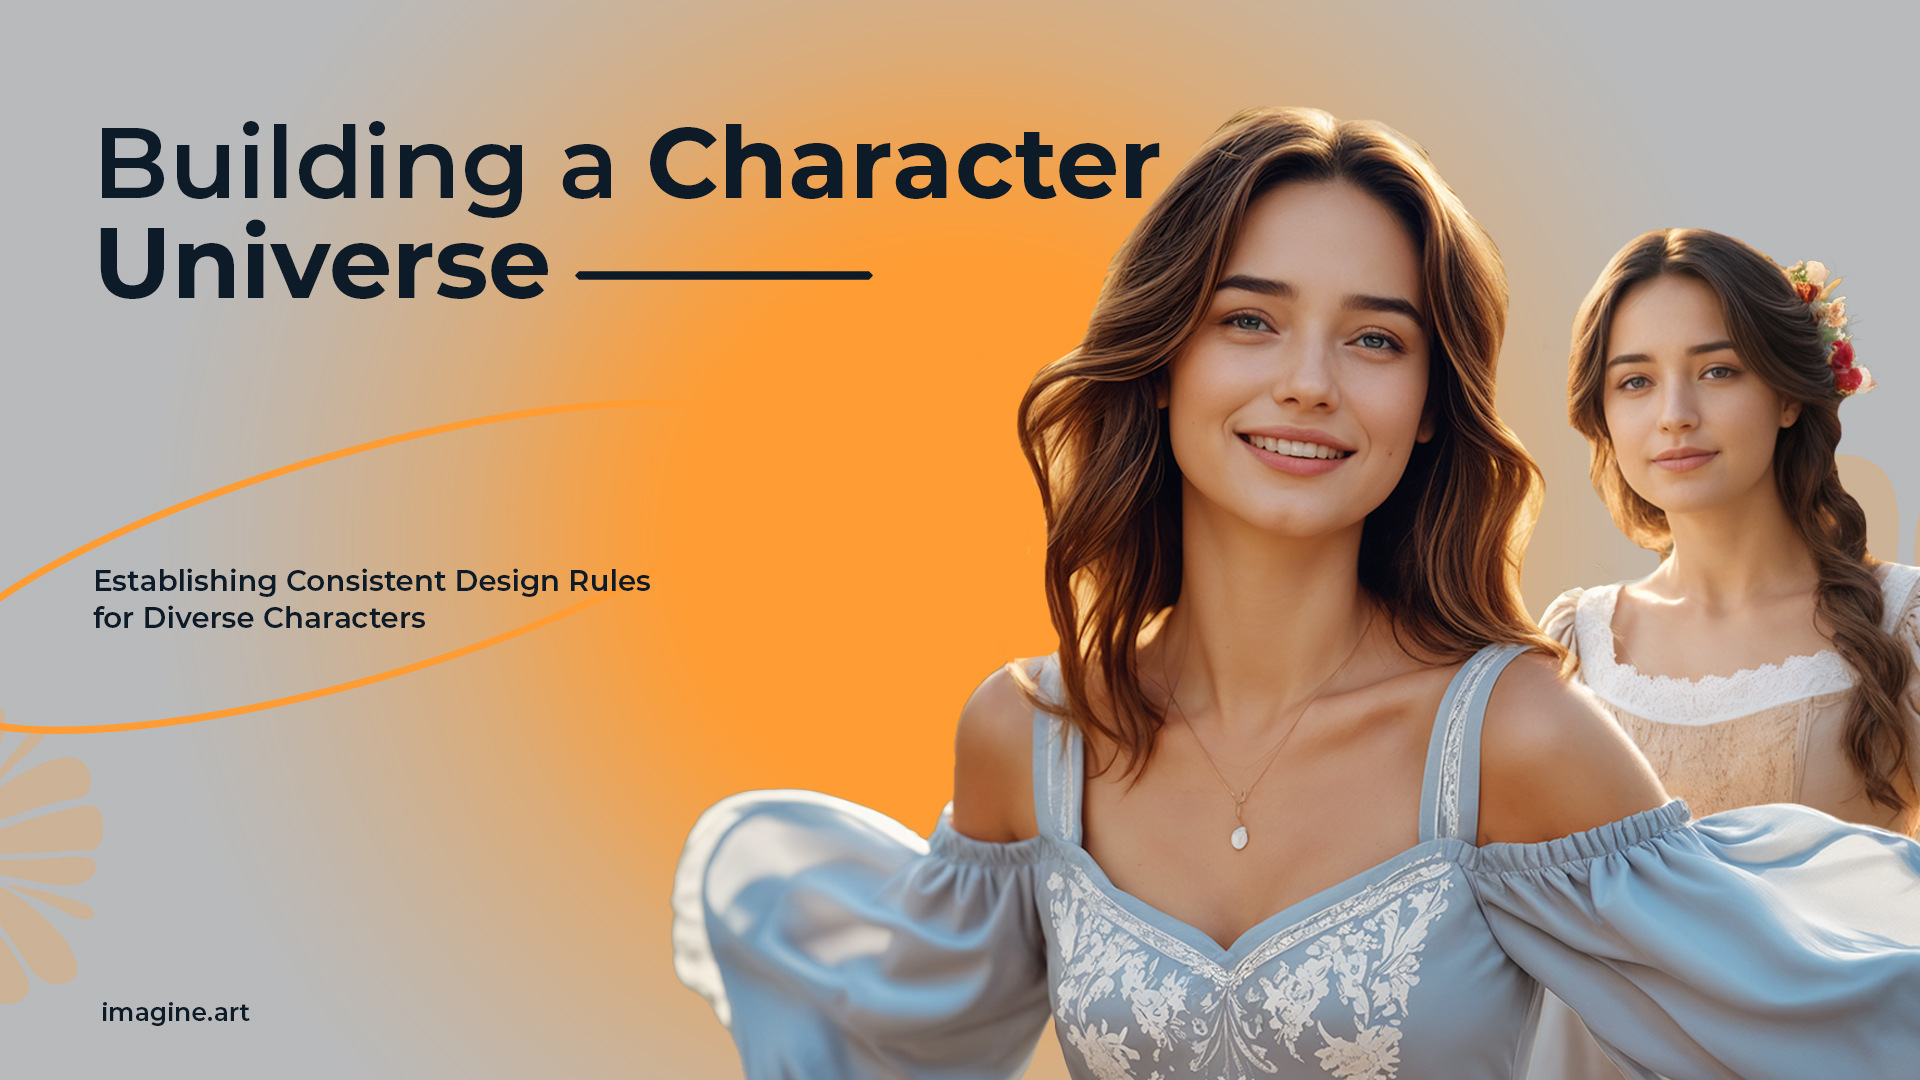 Building a Character Universe: Establishing Consistent Design Rules for Diverse Characters